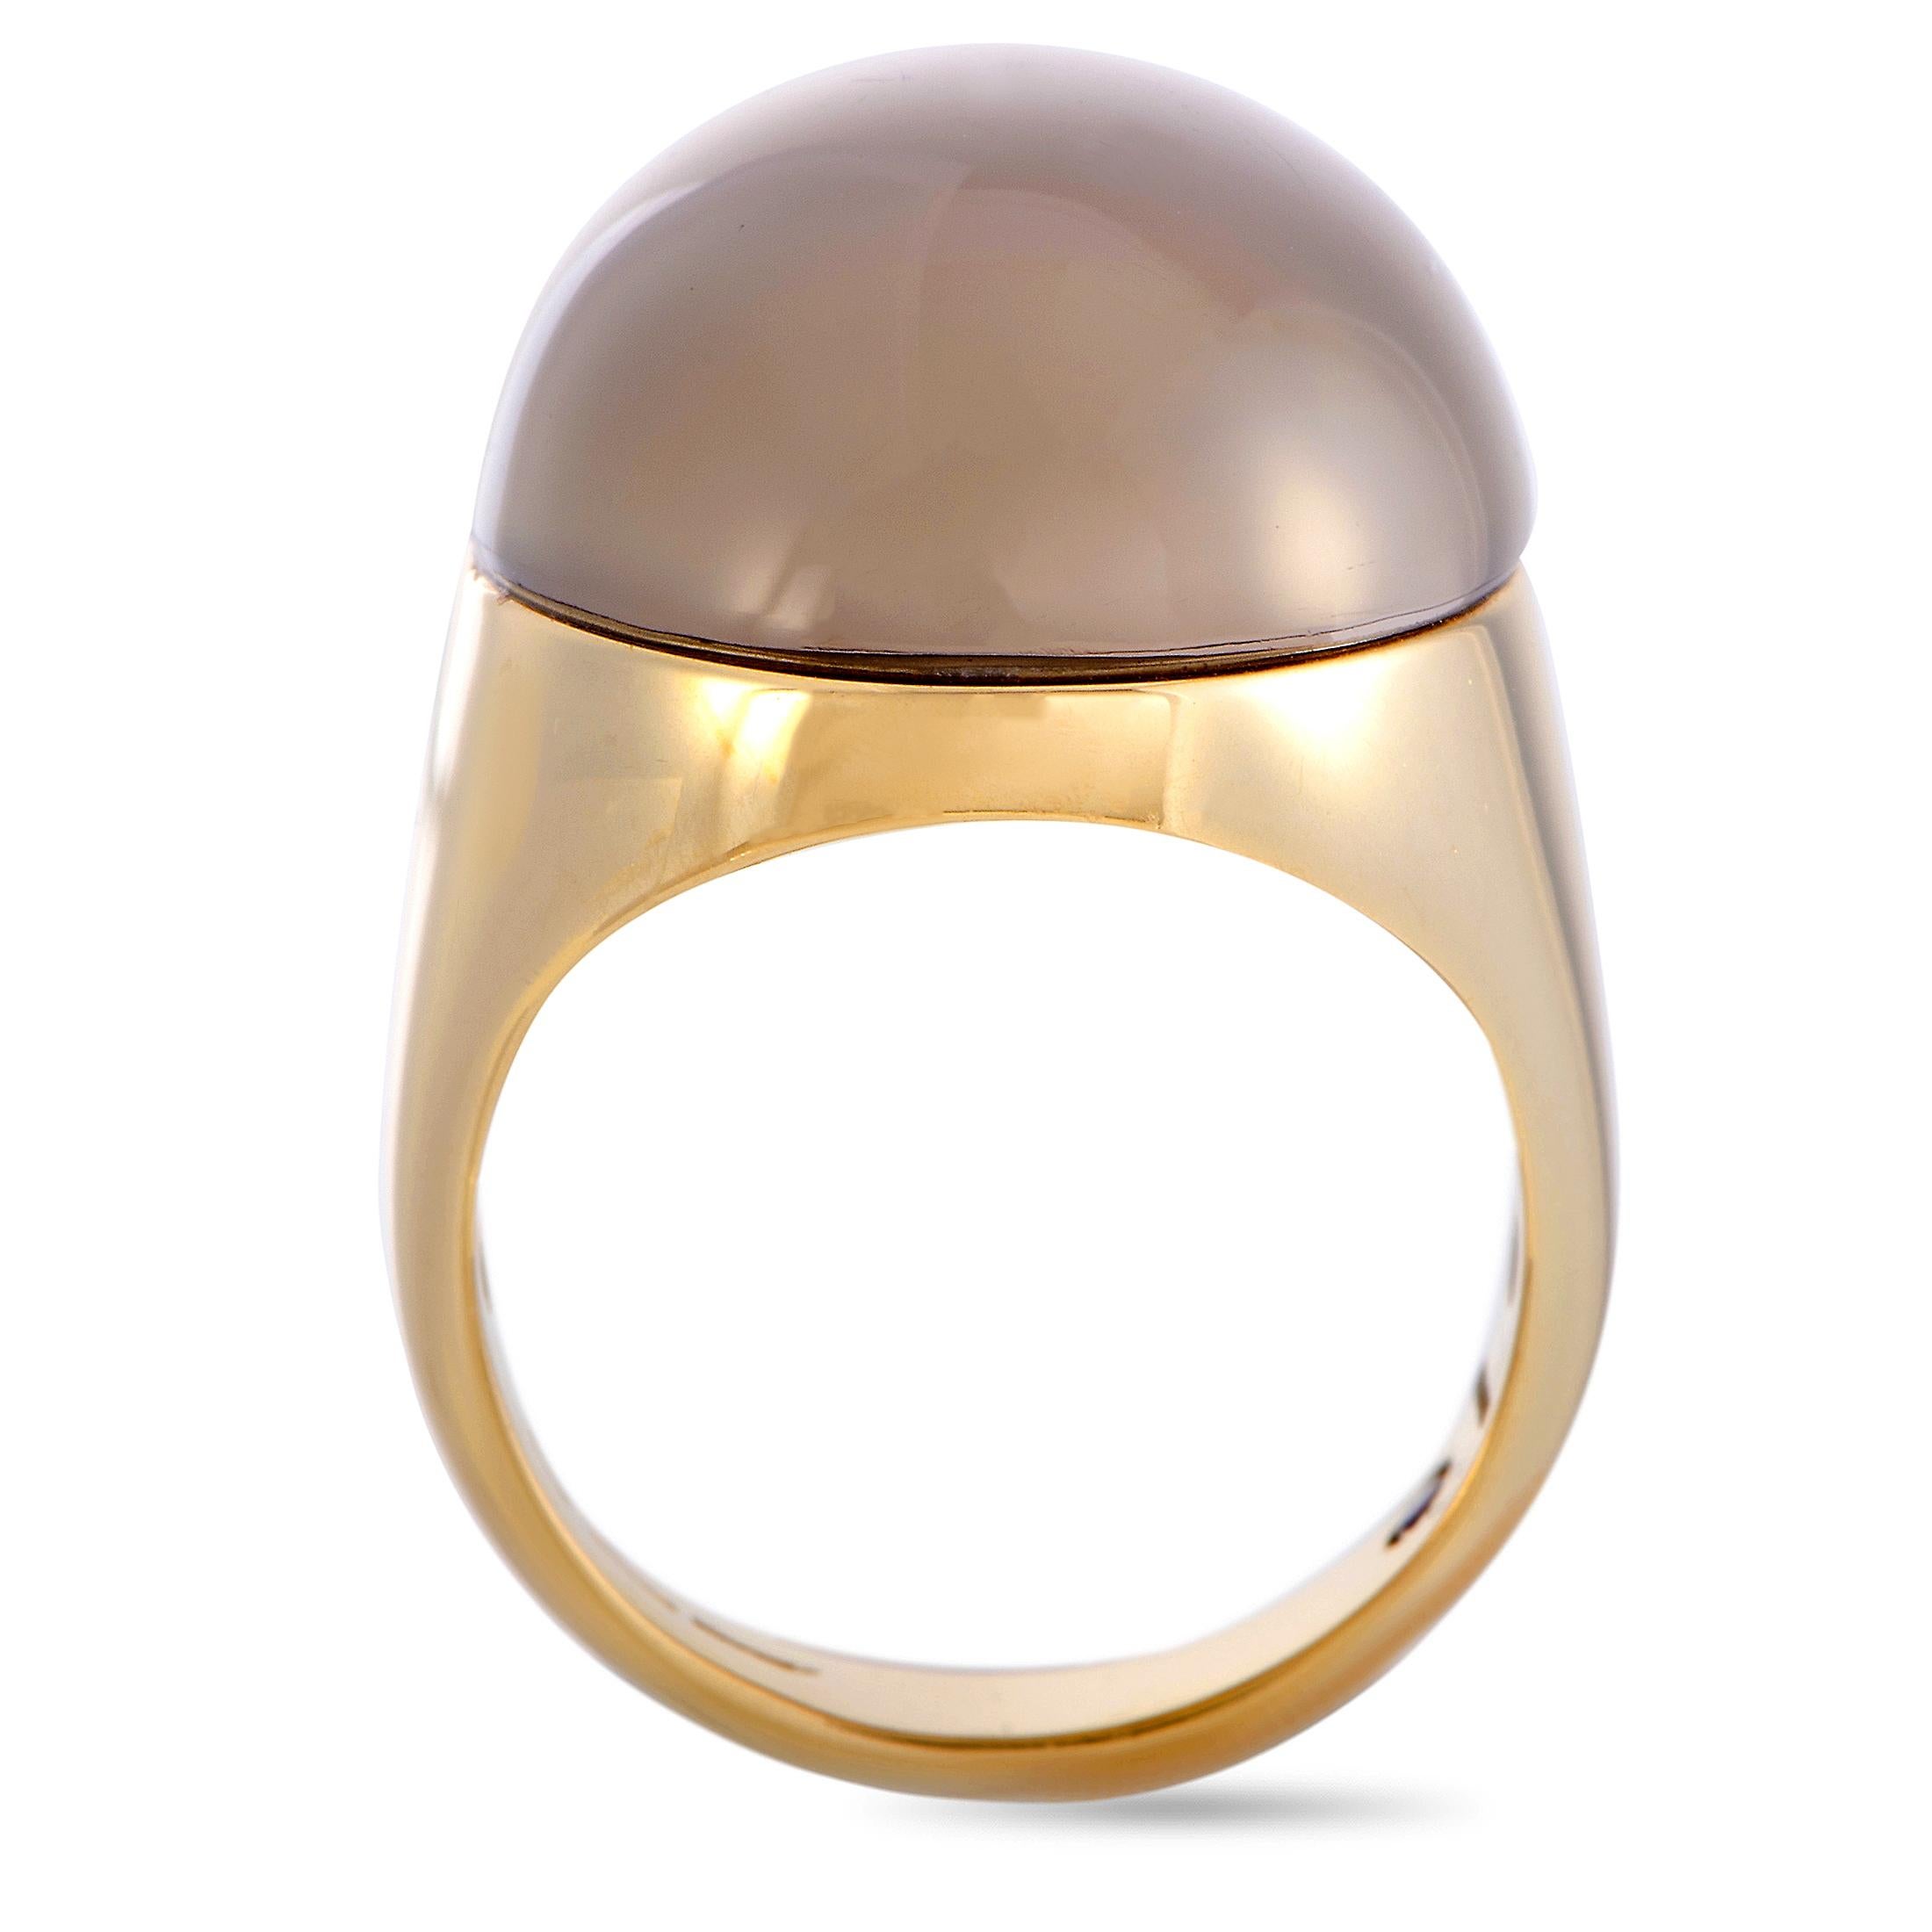 This Roberto Coin ring is crafted from 18K yellow gold and set with a smoky quartz. The ring weighs 14.6 grams, boasting band thickness of 4 mm and top height of 8 mm, while top dimensions measure 24 by 18 mm.

Ring Size: 6.5

Offered in brand new